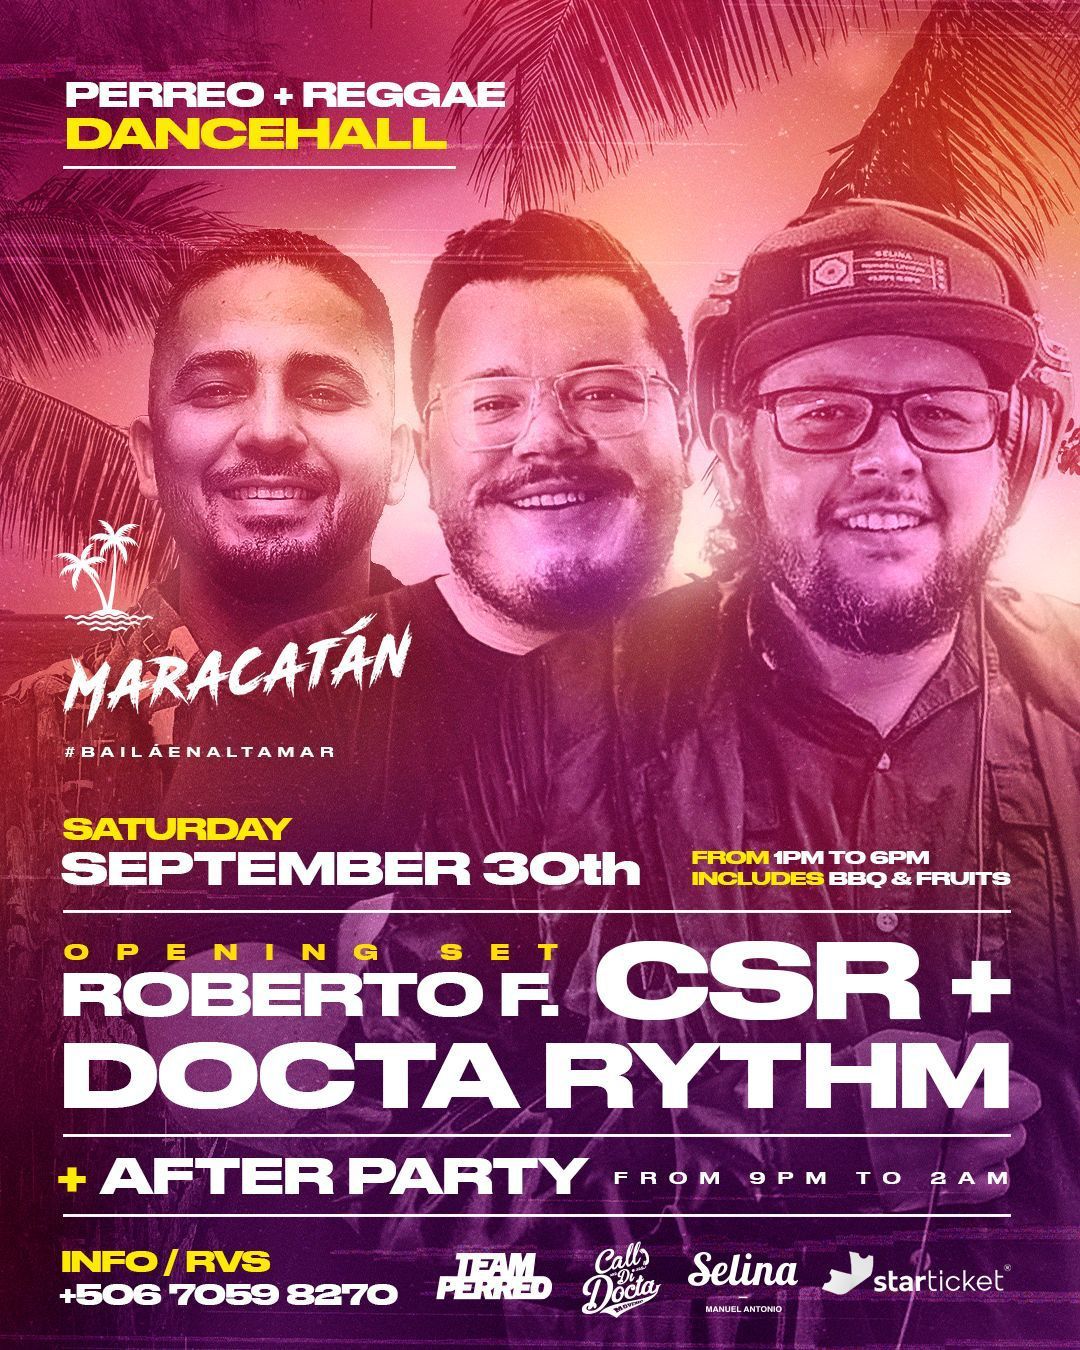 BoatParty / Docta Rythm ft CSR from #TeamPerreo